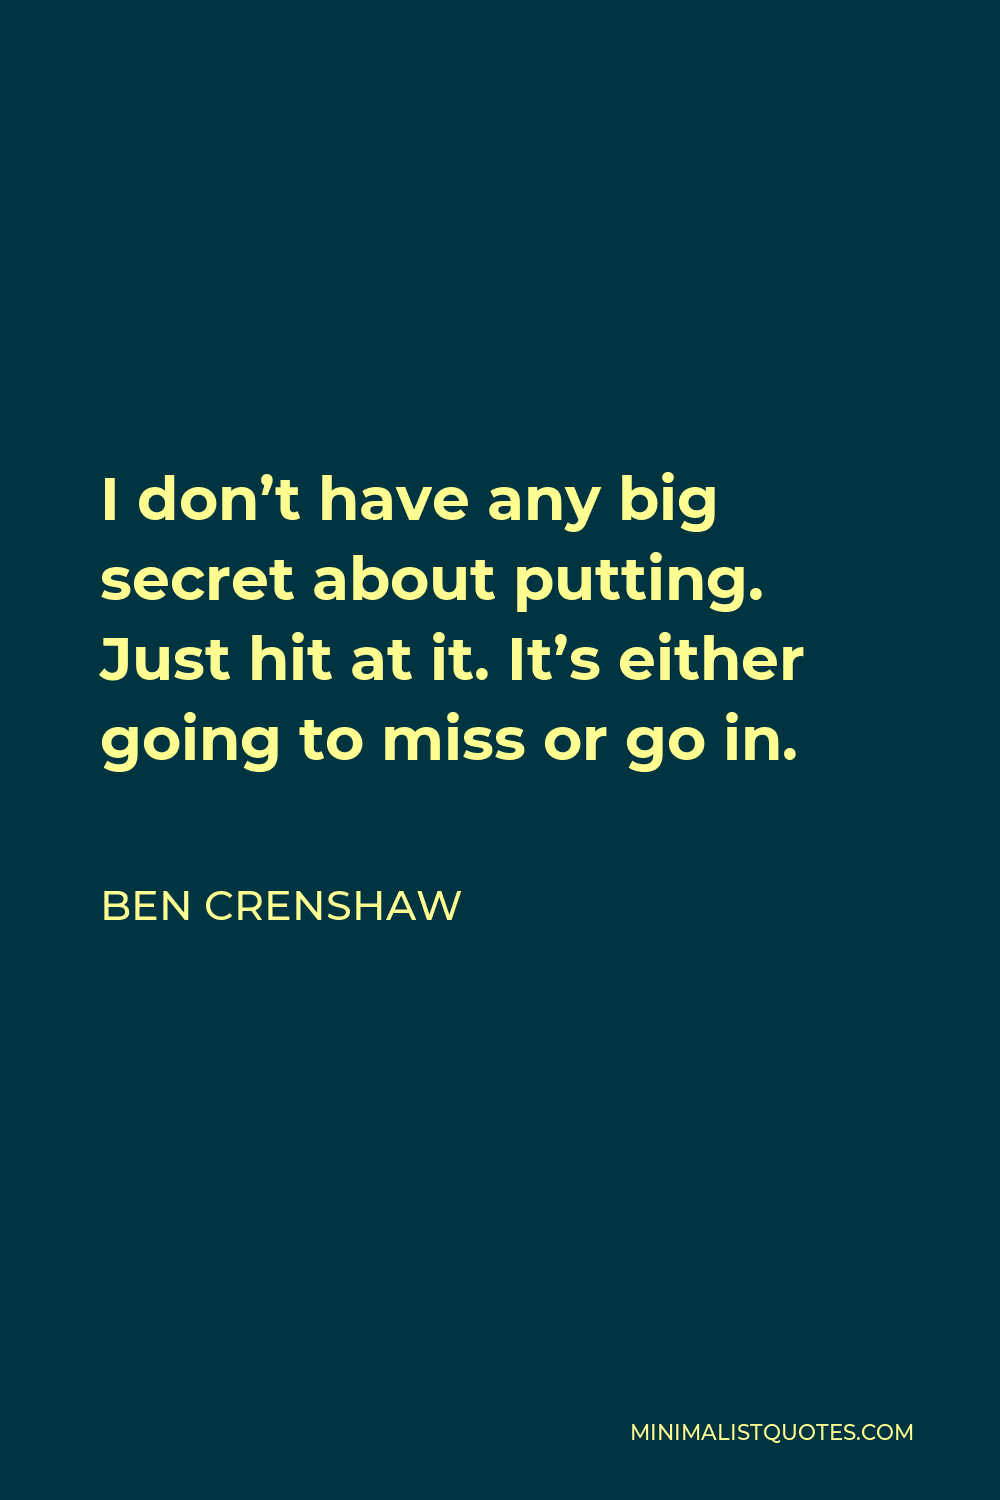 Ben Crenshaw Quote - I don’t have any big secret about putting. Just hit at it. It’s either going to miss or go in.